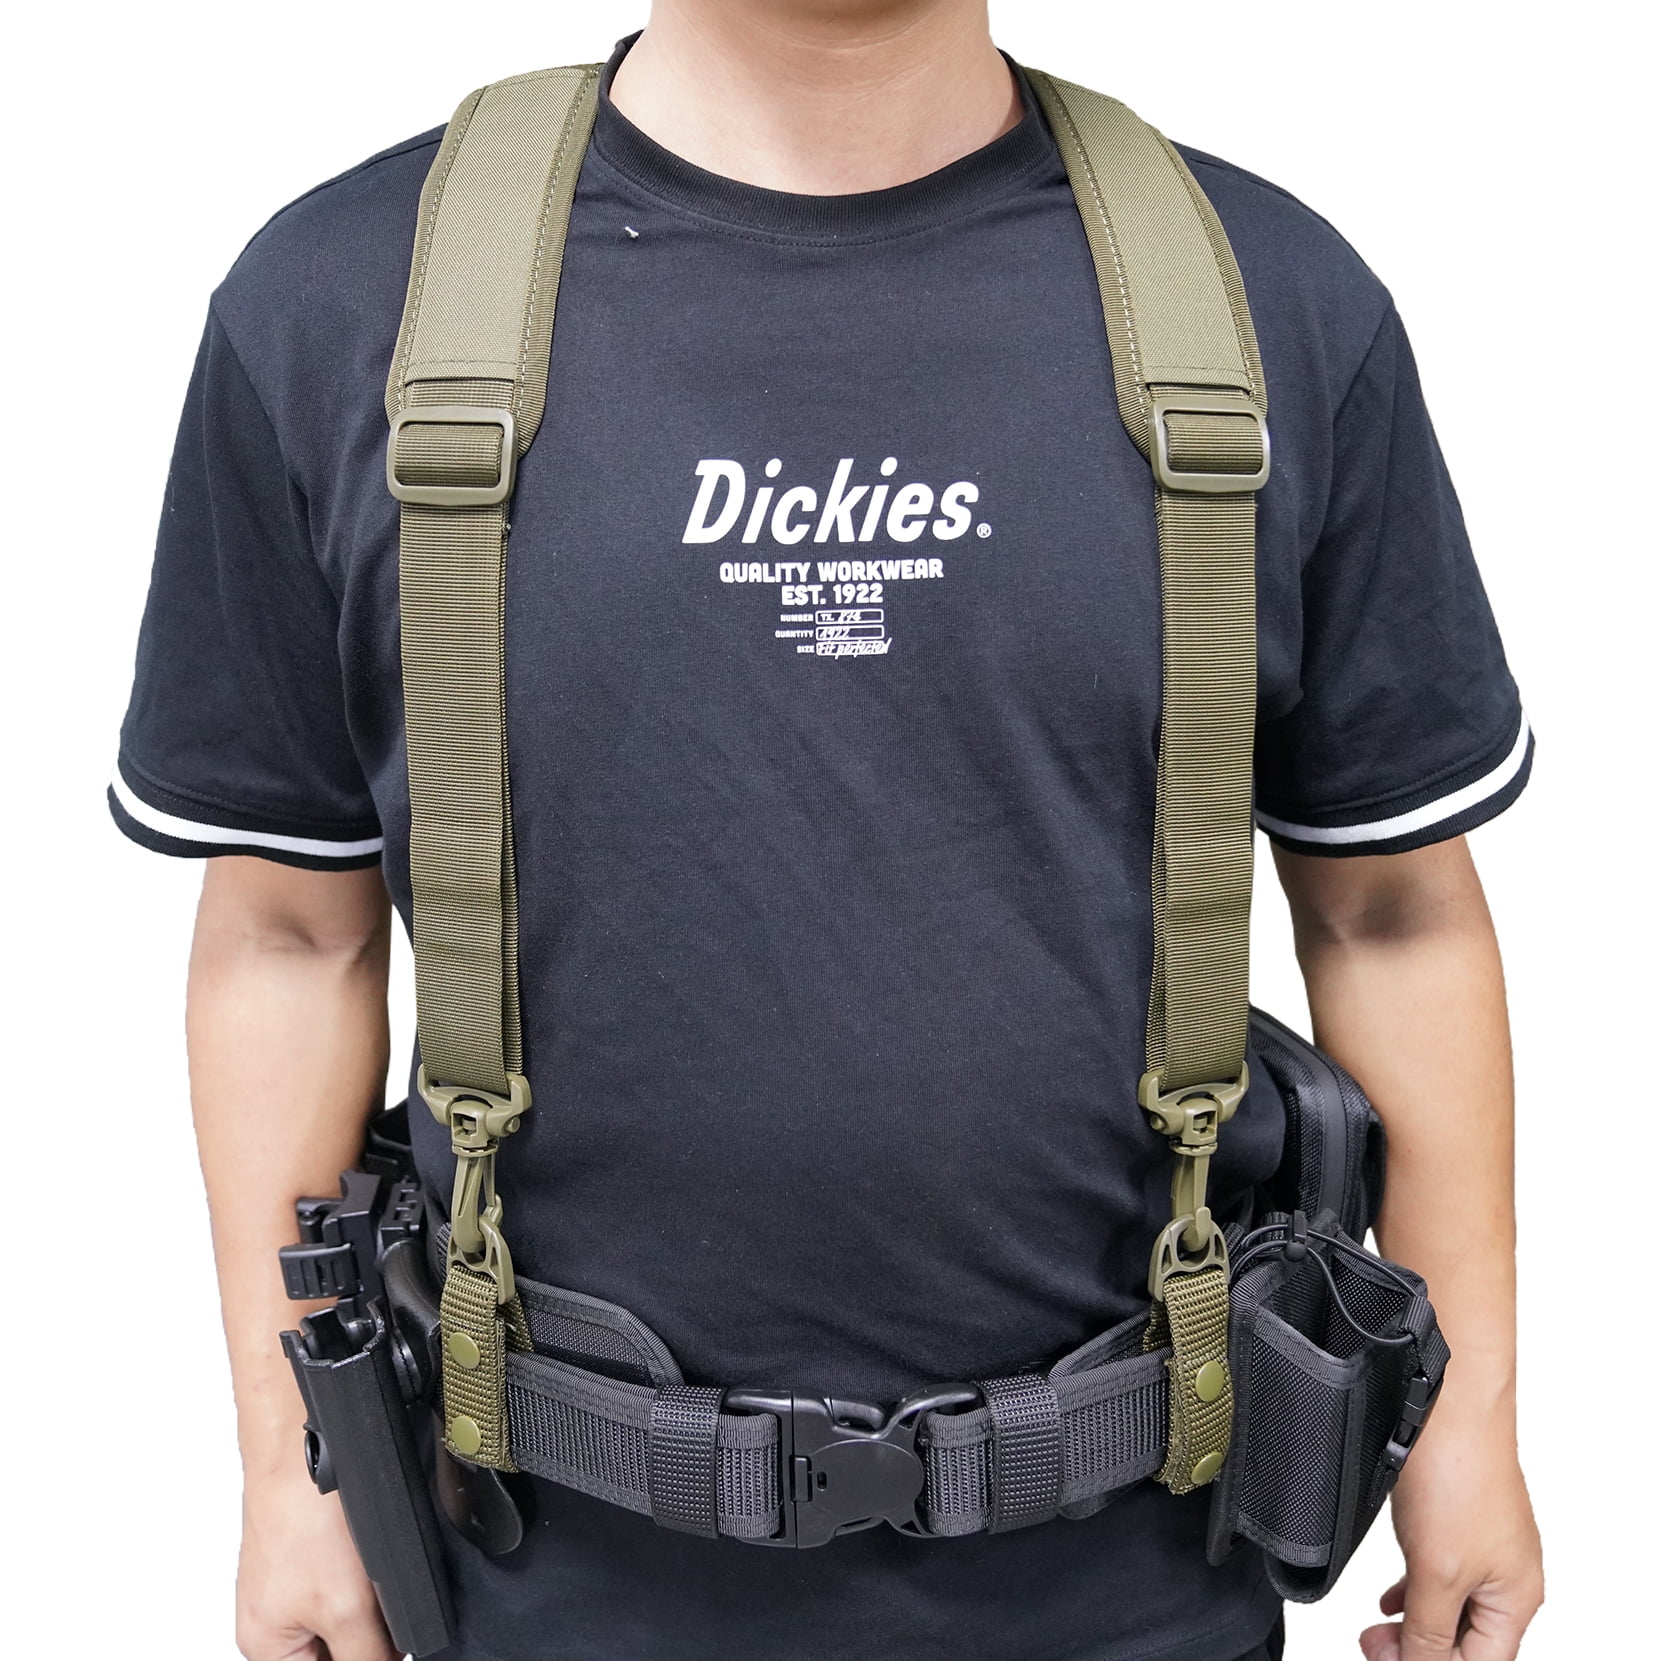 MELOTOUGH Tactical Suspenders Duty Belt Harness Padded Adjustable Police  Suspenders Tool Belt Suspenders with Key Holder : : Clothing,  Shoes & Accessories